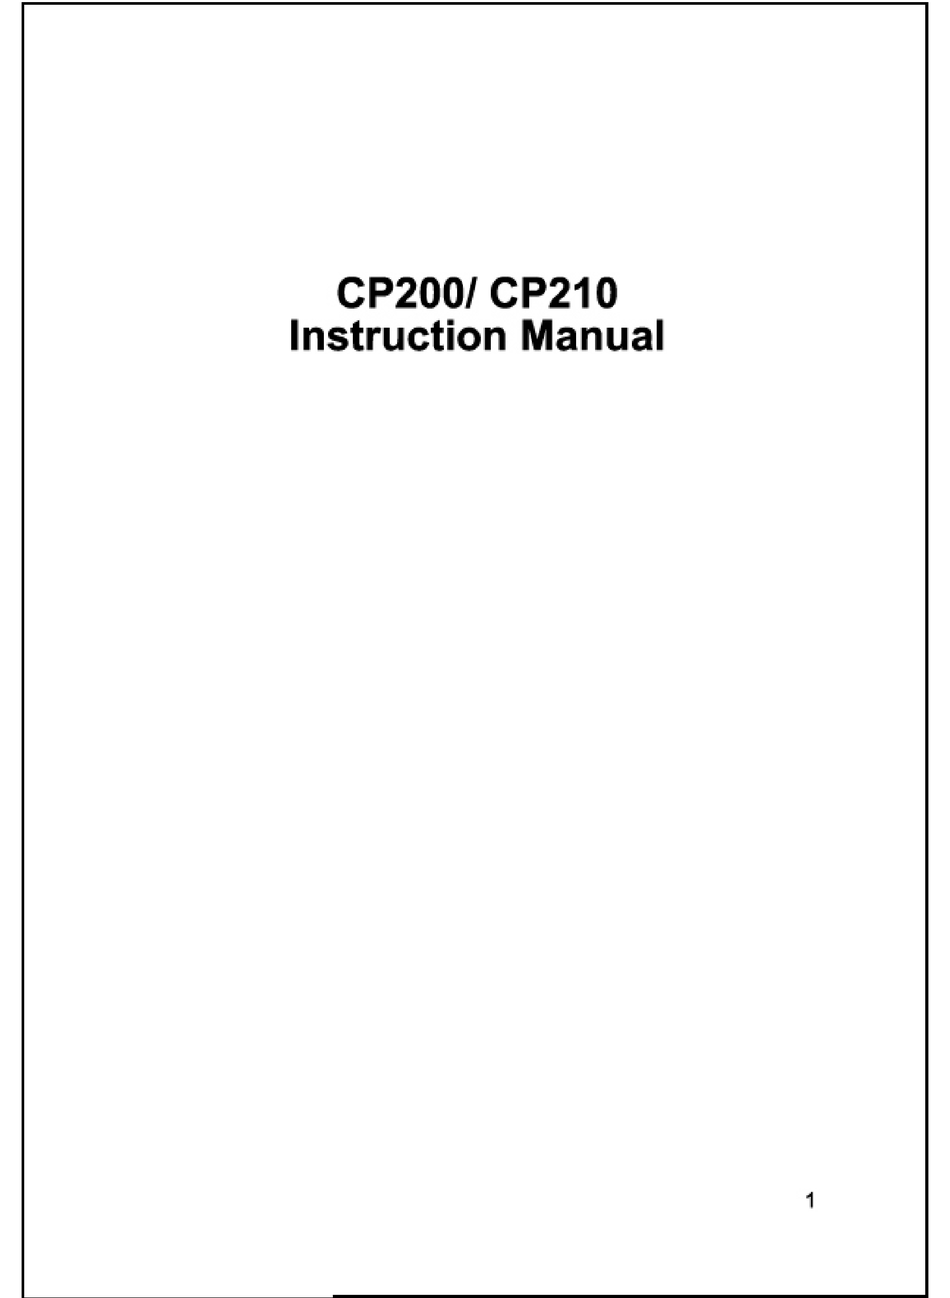 cps ar300 service manual